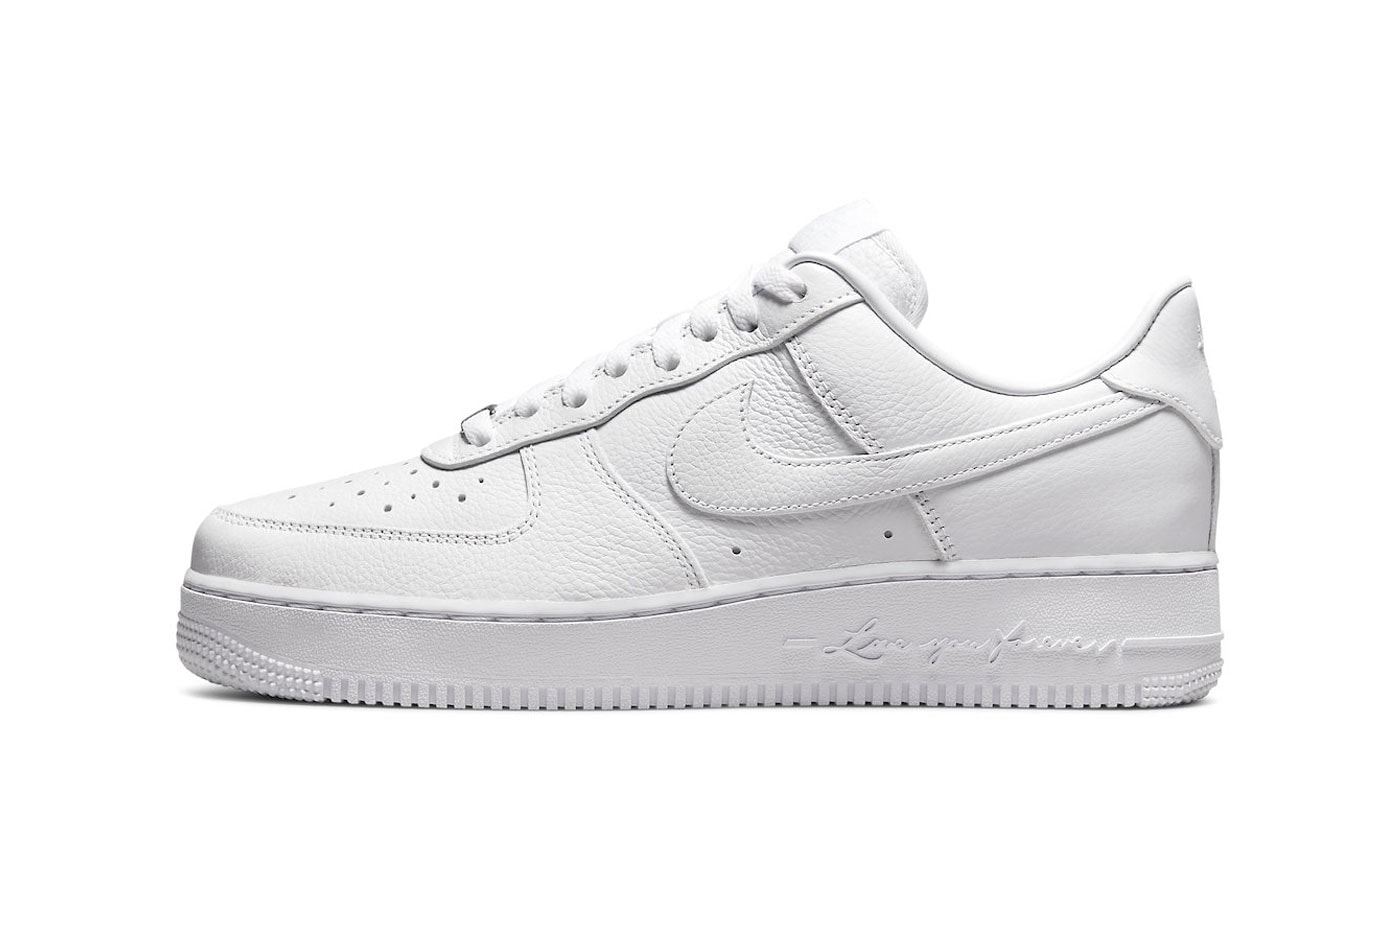 Drake NOCTA Certified Lover Boy Nike Air Force 1 CZ8065-100 Price Release Info